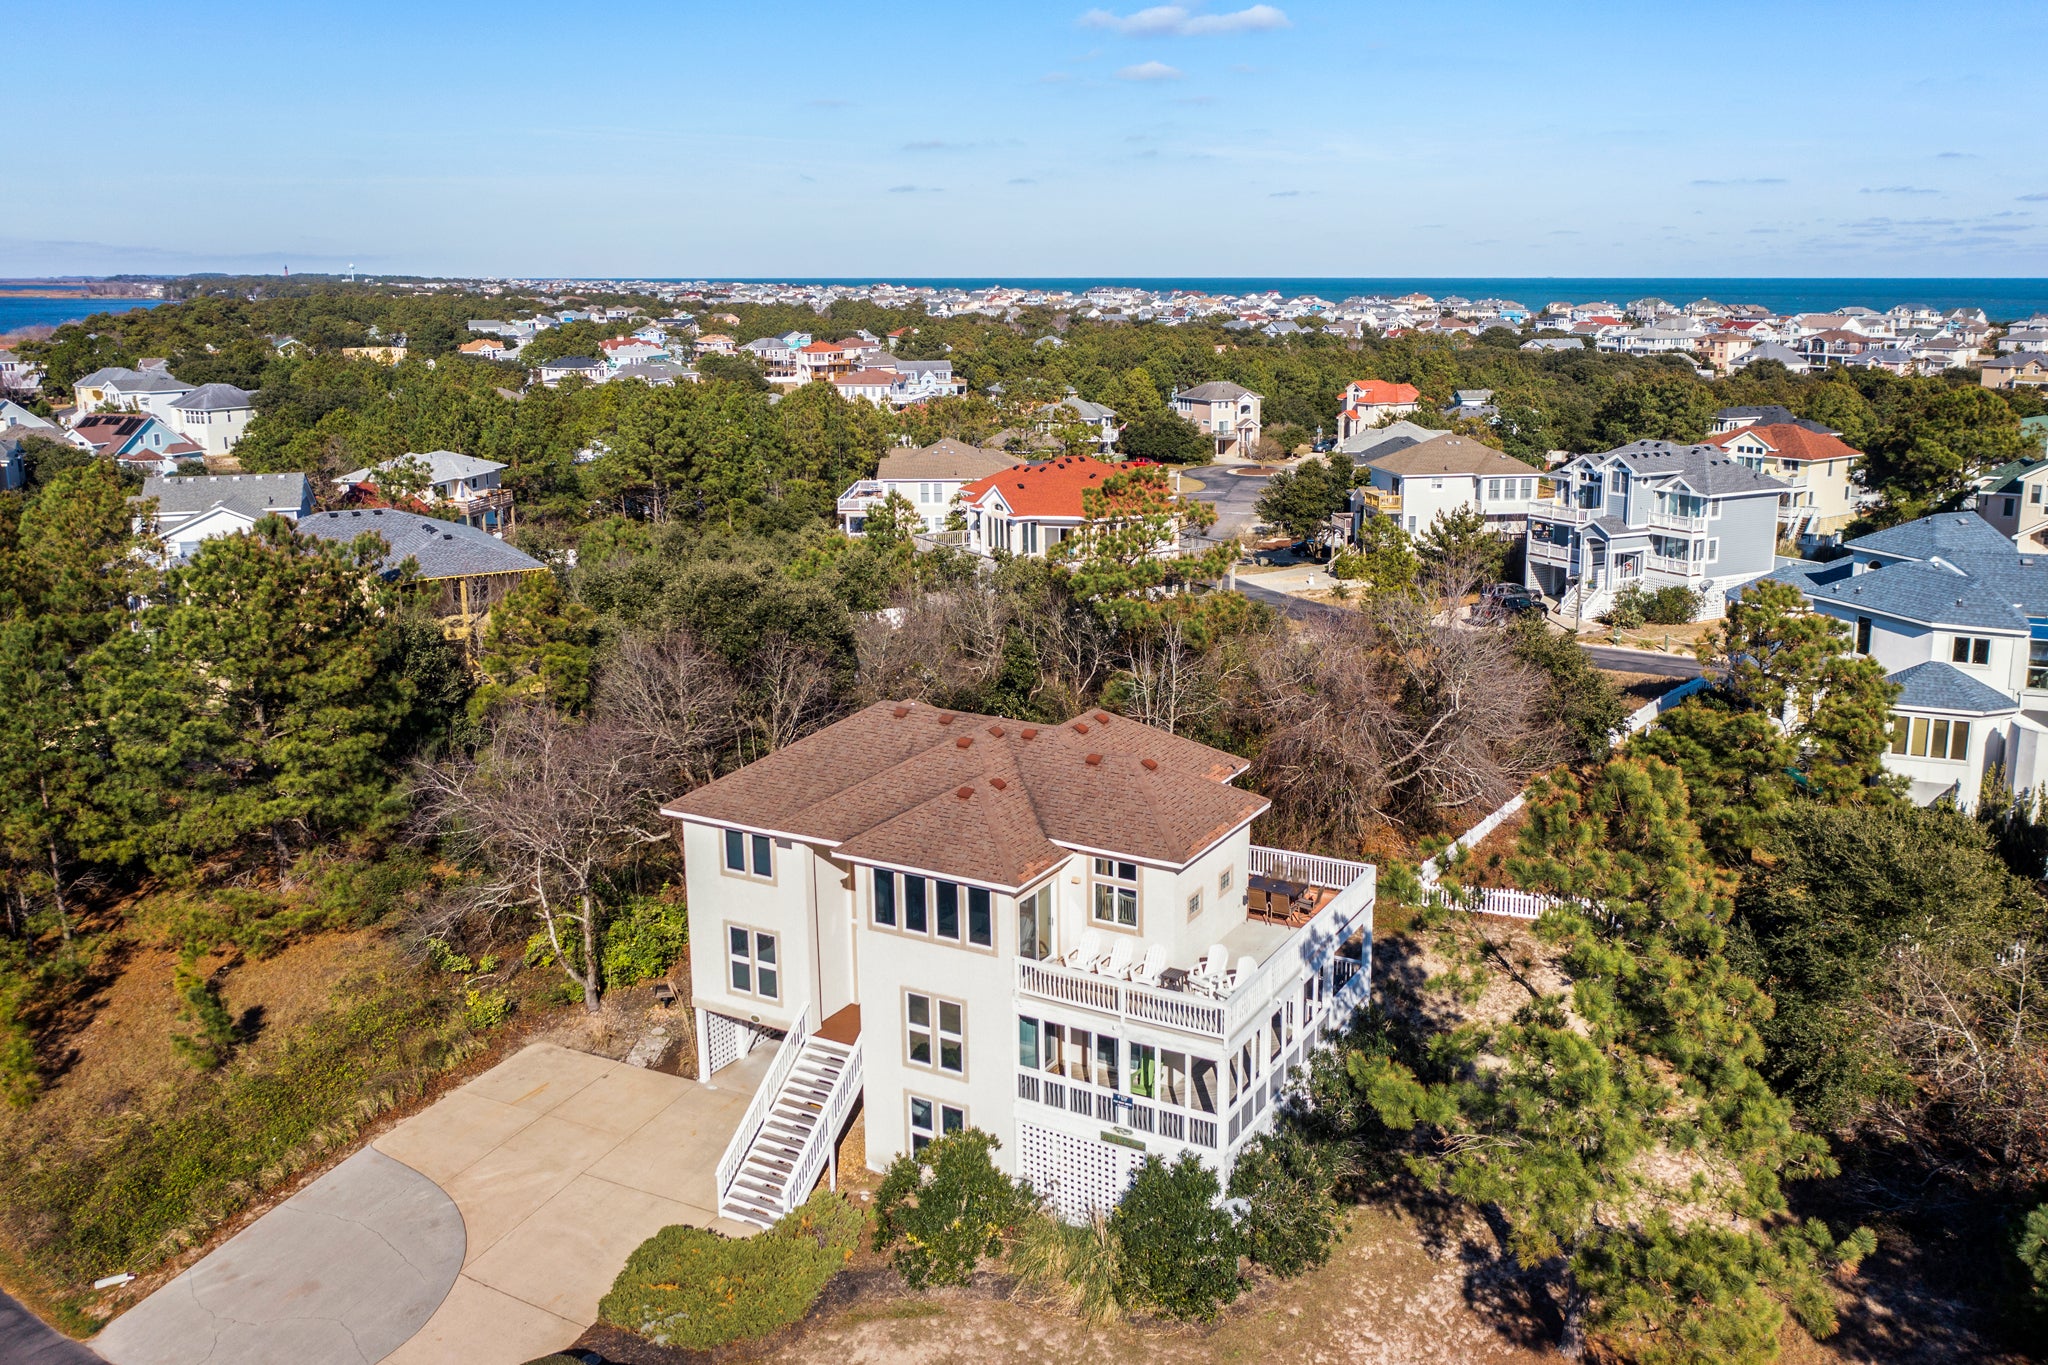 M839: It's All Good In Corolla l Aerial View